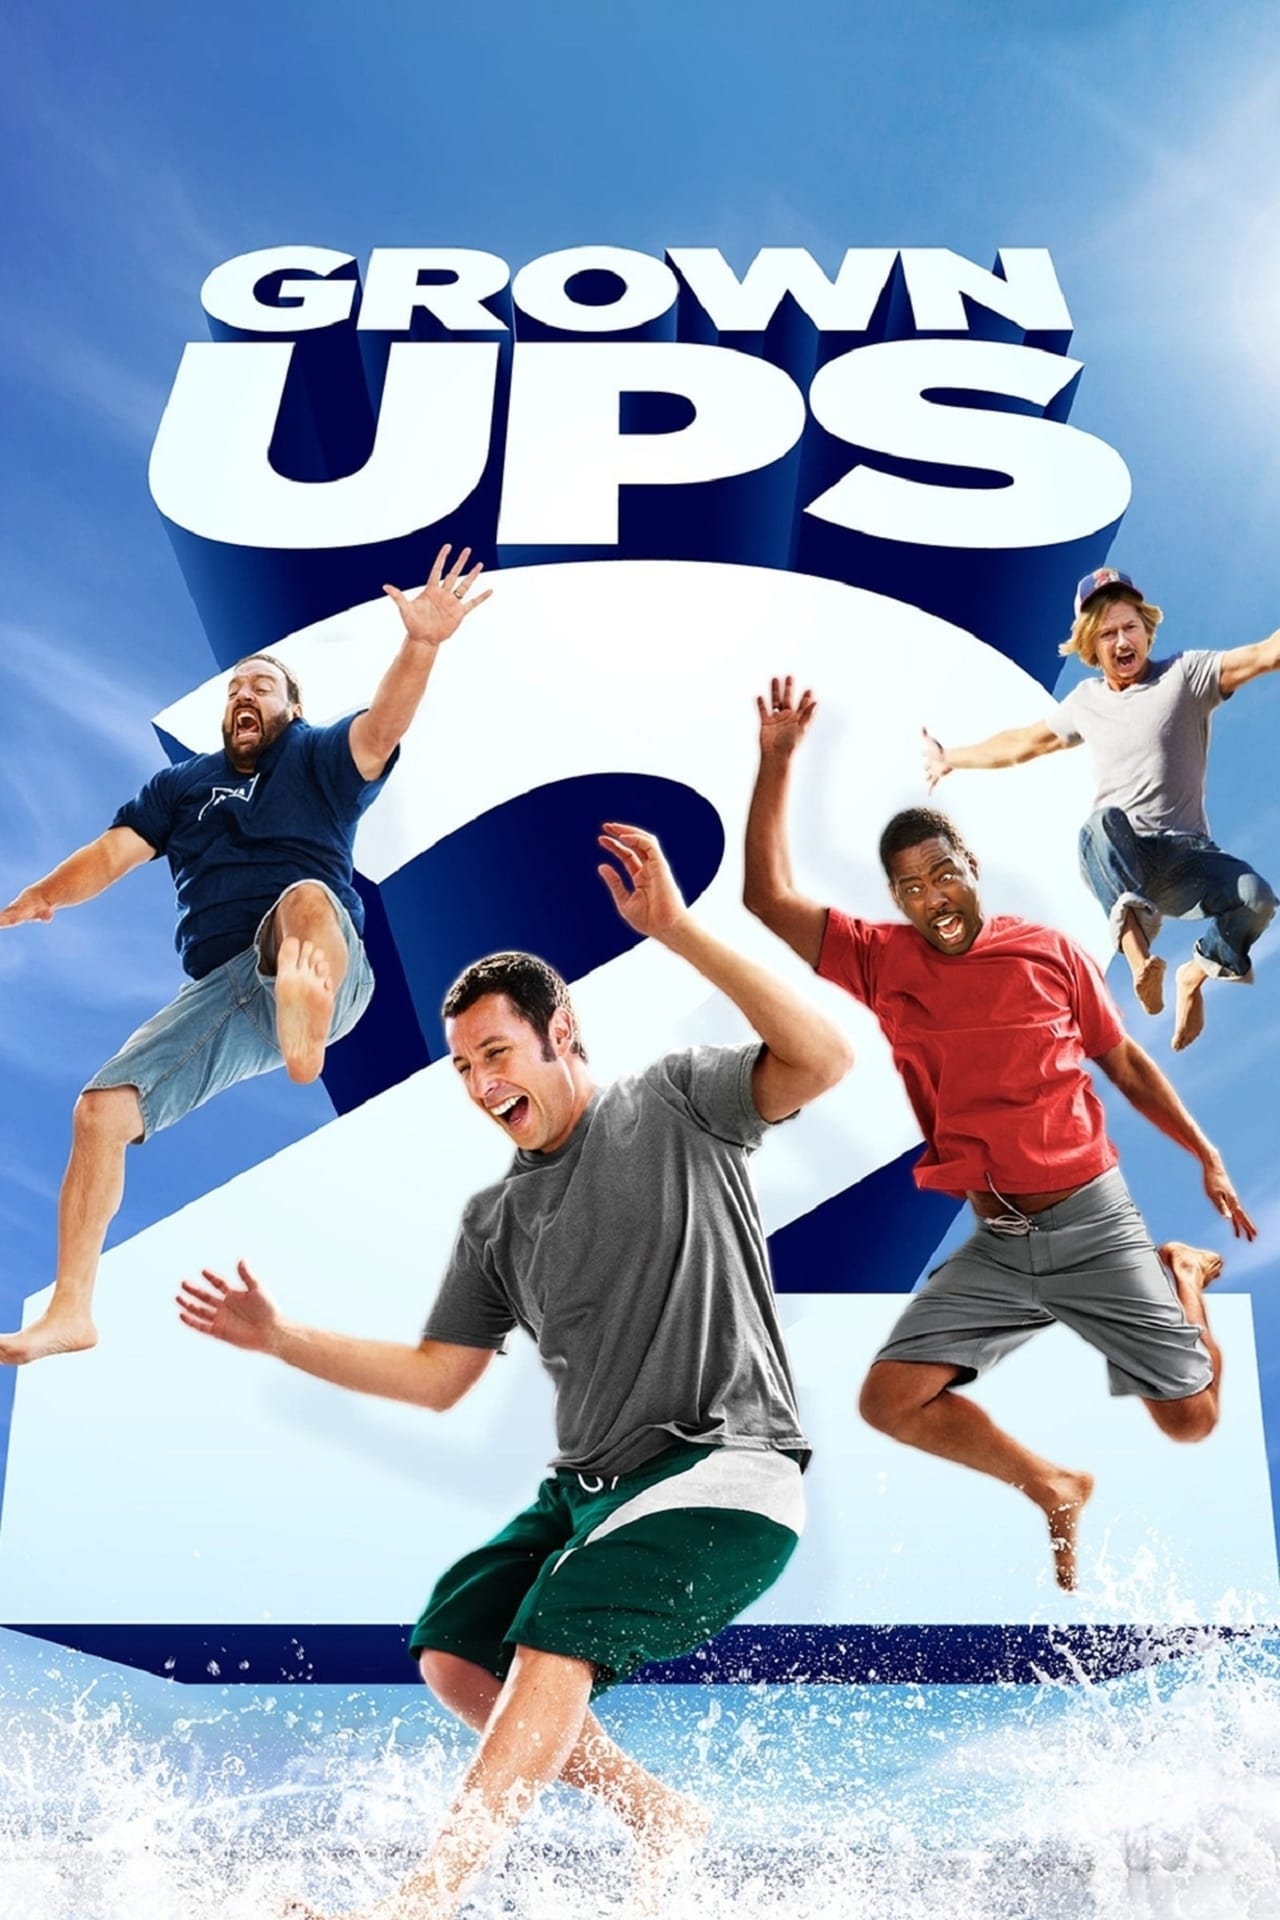 where did they film grown ups 2